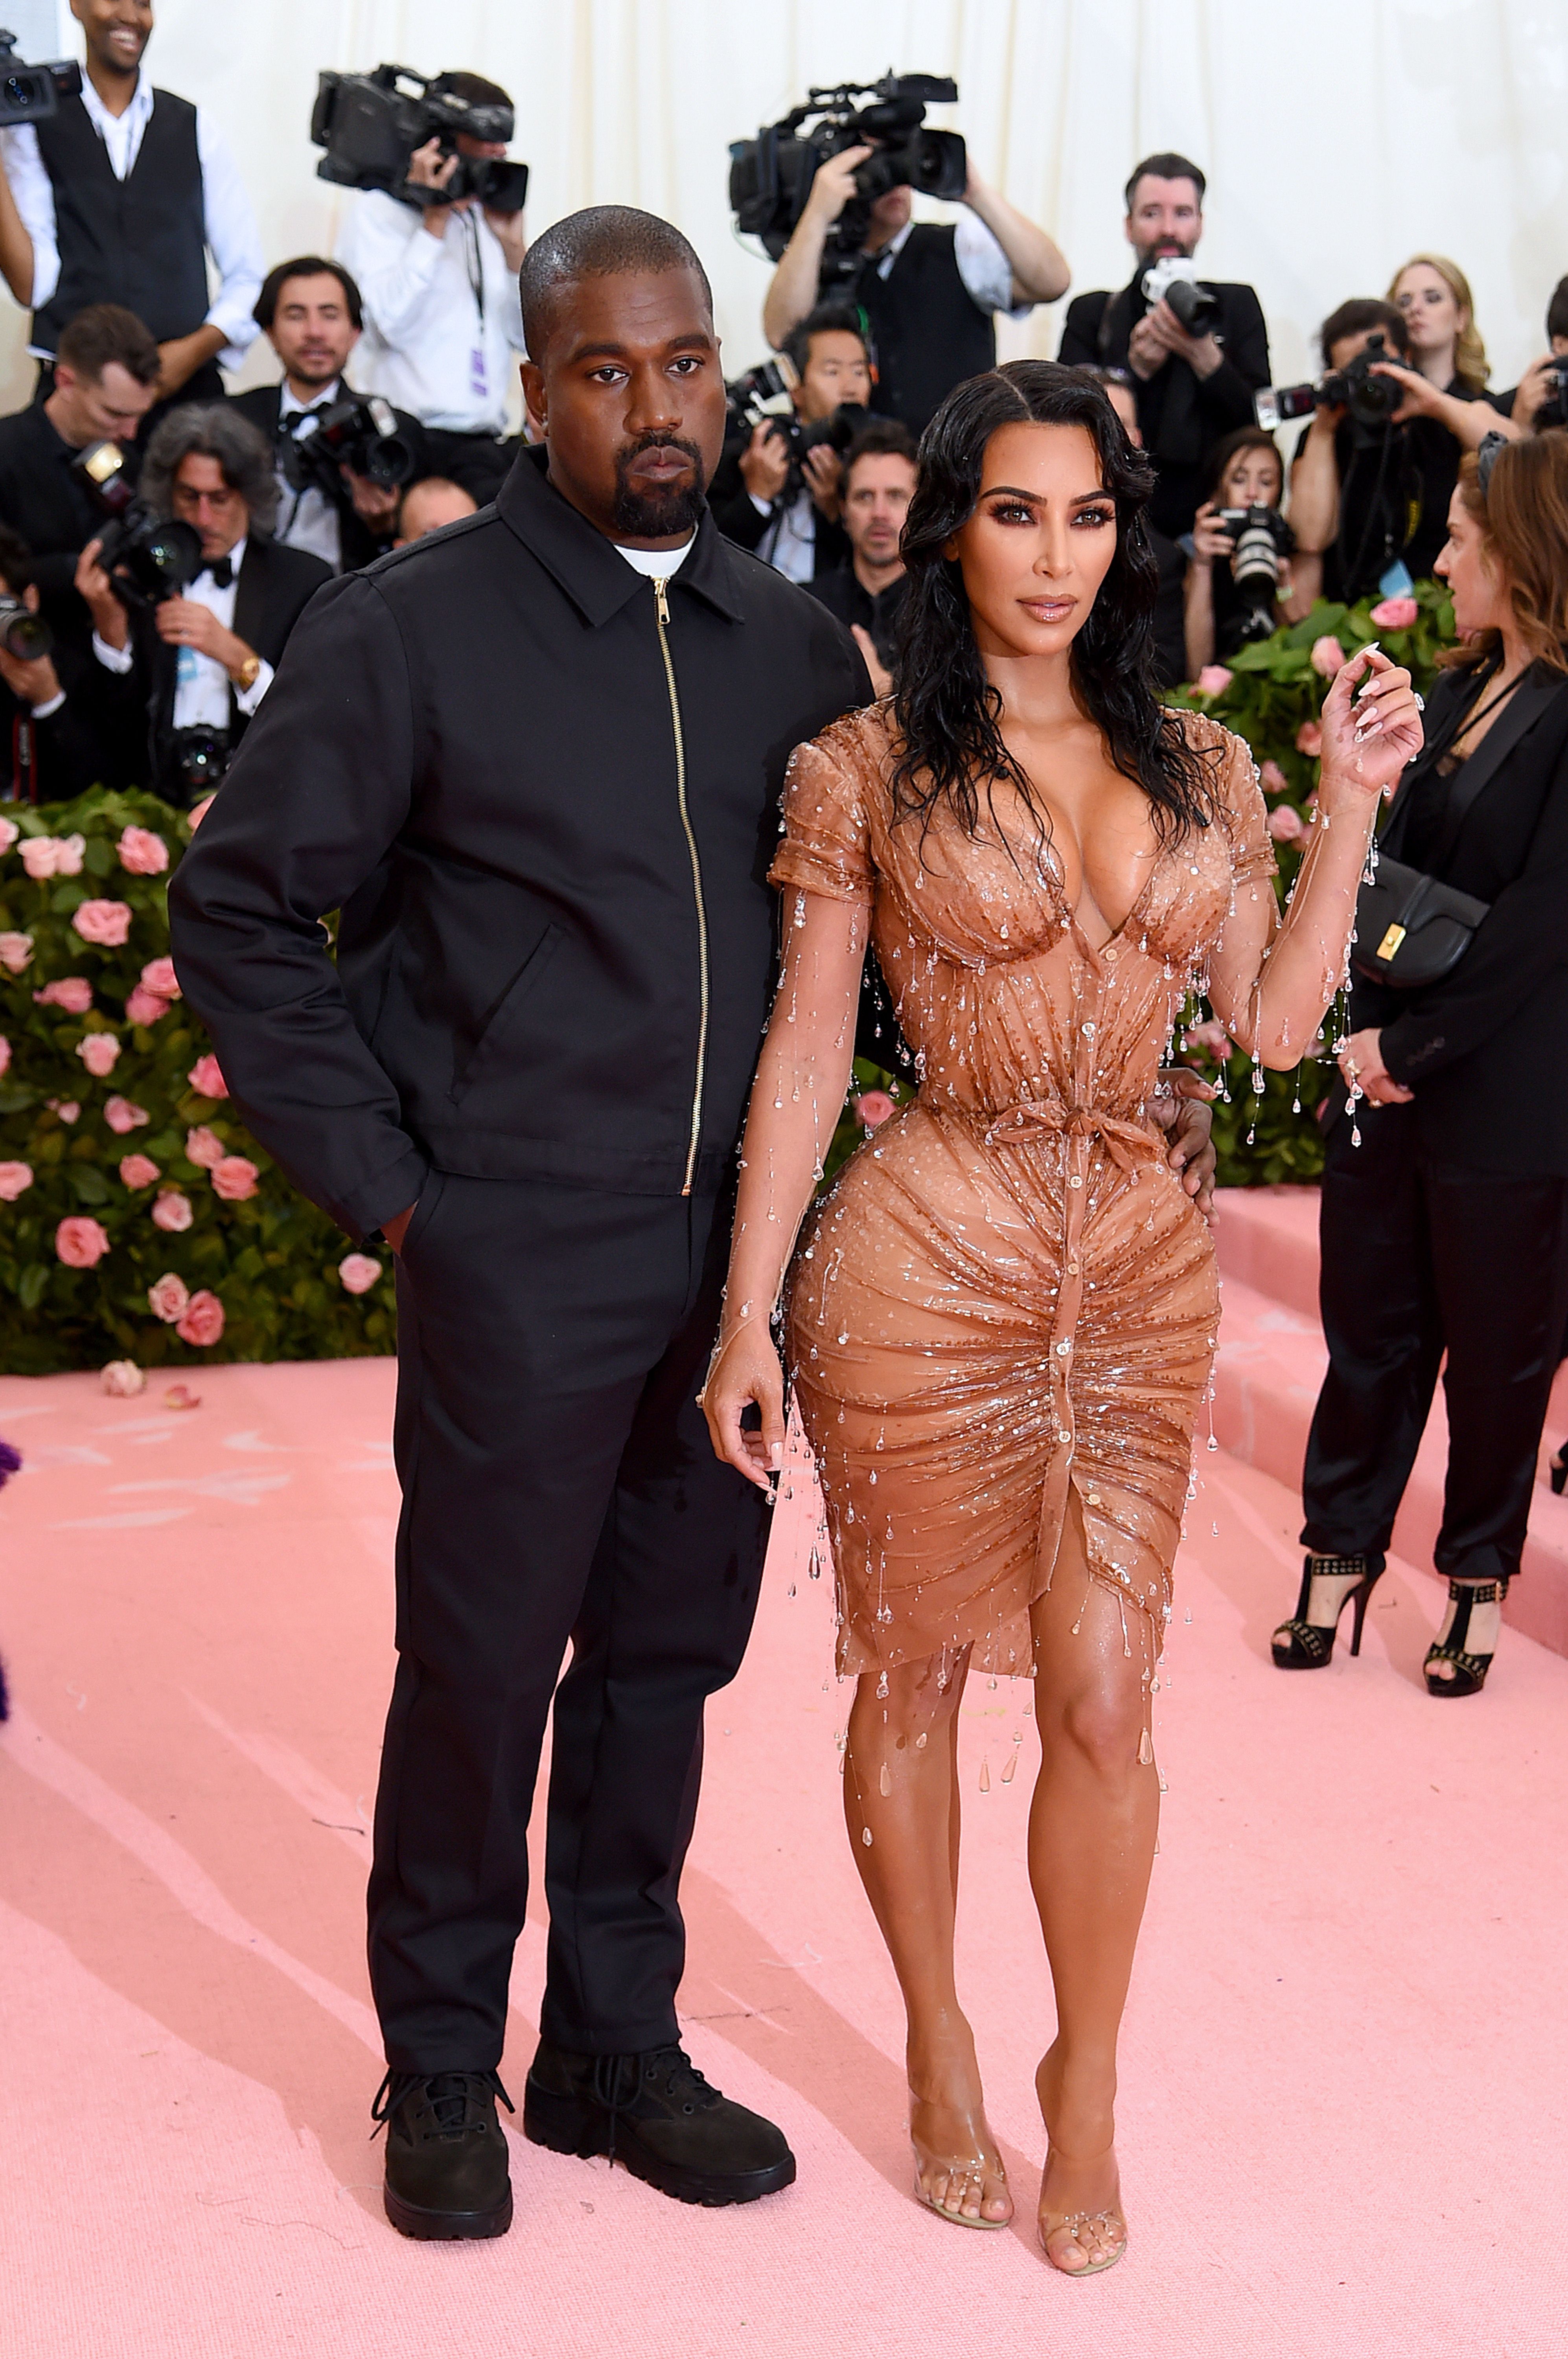 Kanye West and Kim Kardashian West during the 2019 Met Gala Celebrating Camp: Notes on Fashion at Metropolitan Museum of Art on May 06, 2019 in New York City. | Source: Getty Images